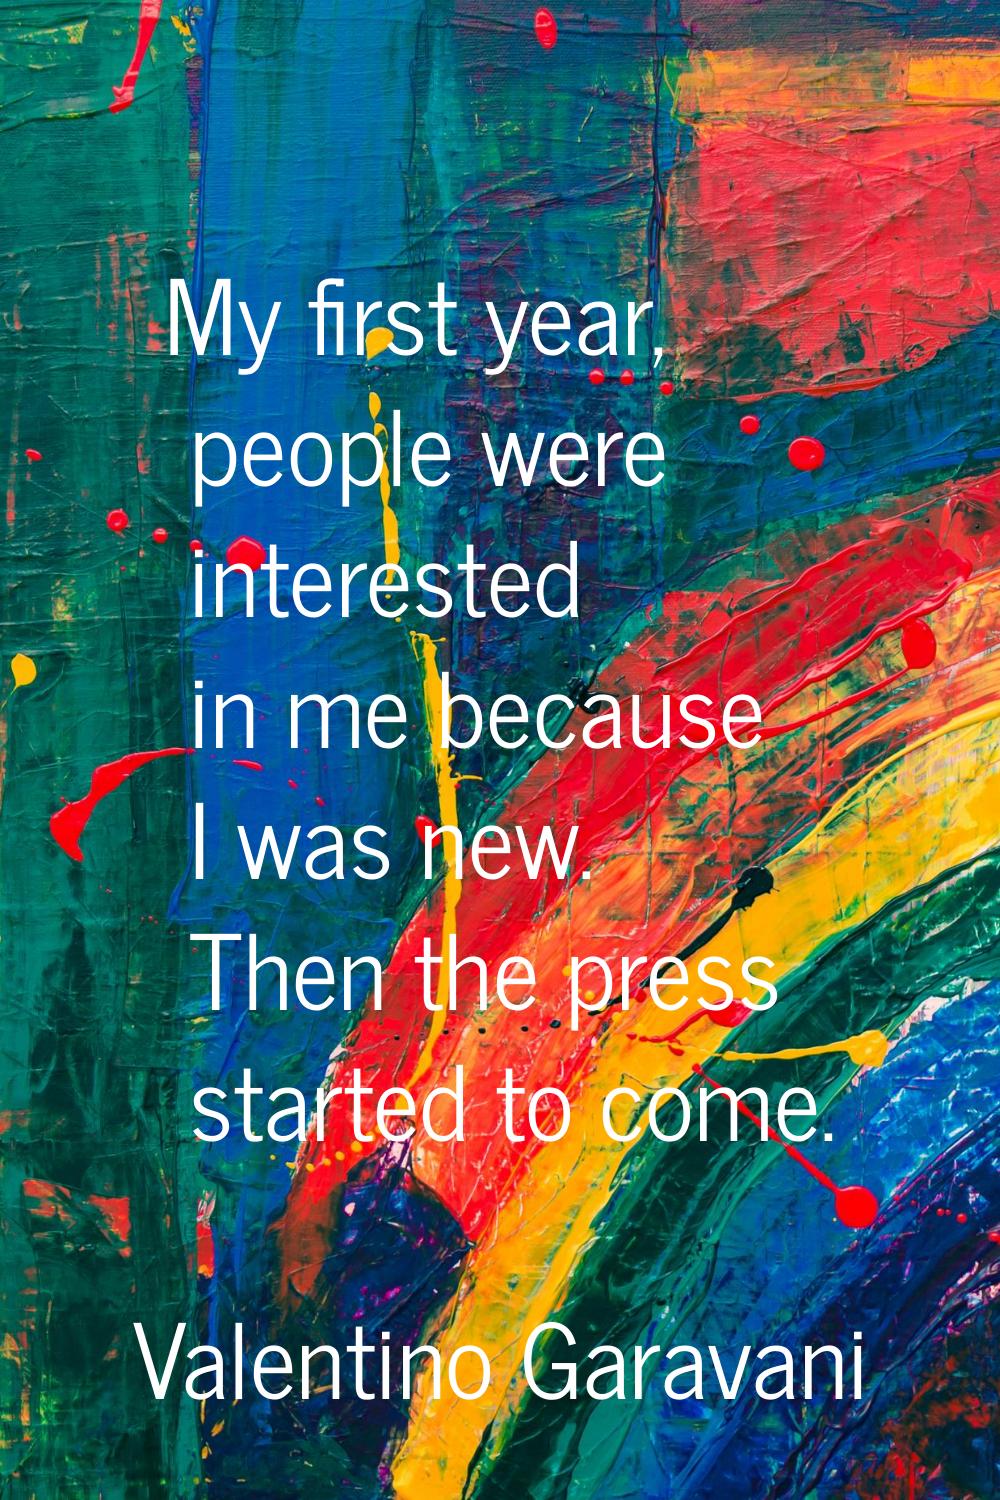 My first year, people were interested in me because I was new. Then the press started to come.